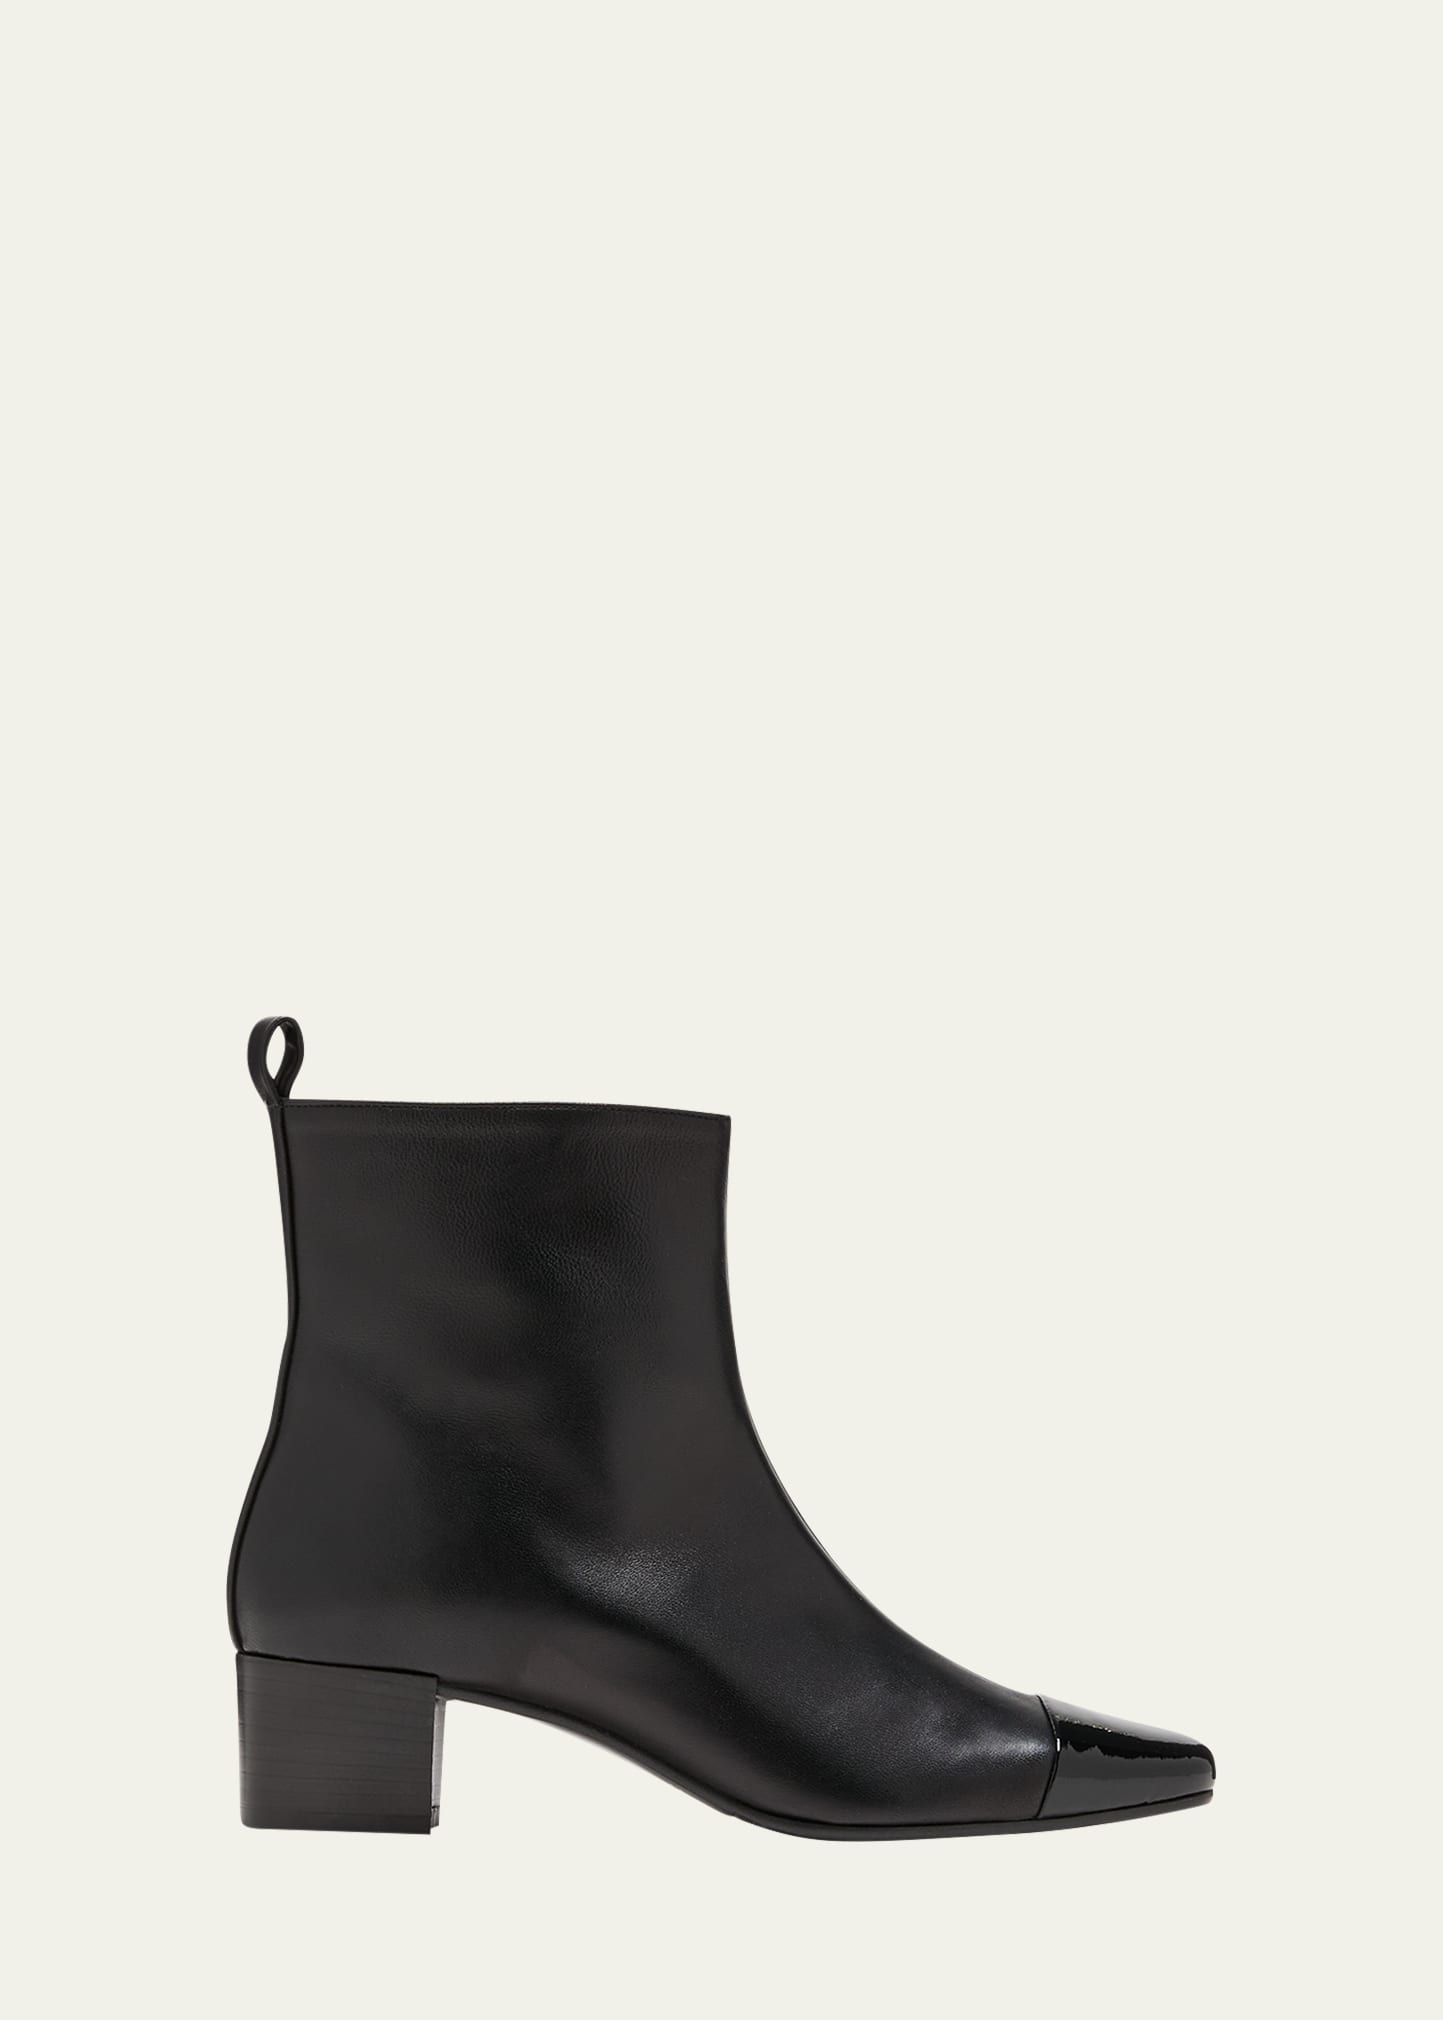 Shop Carel Estime Mixed Leather Ankle Boots In Black